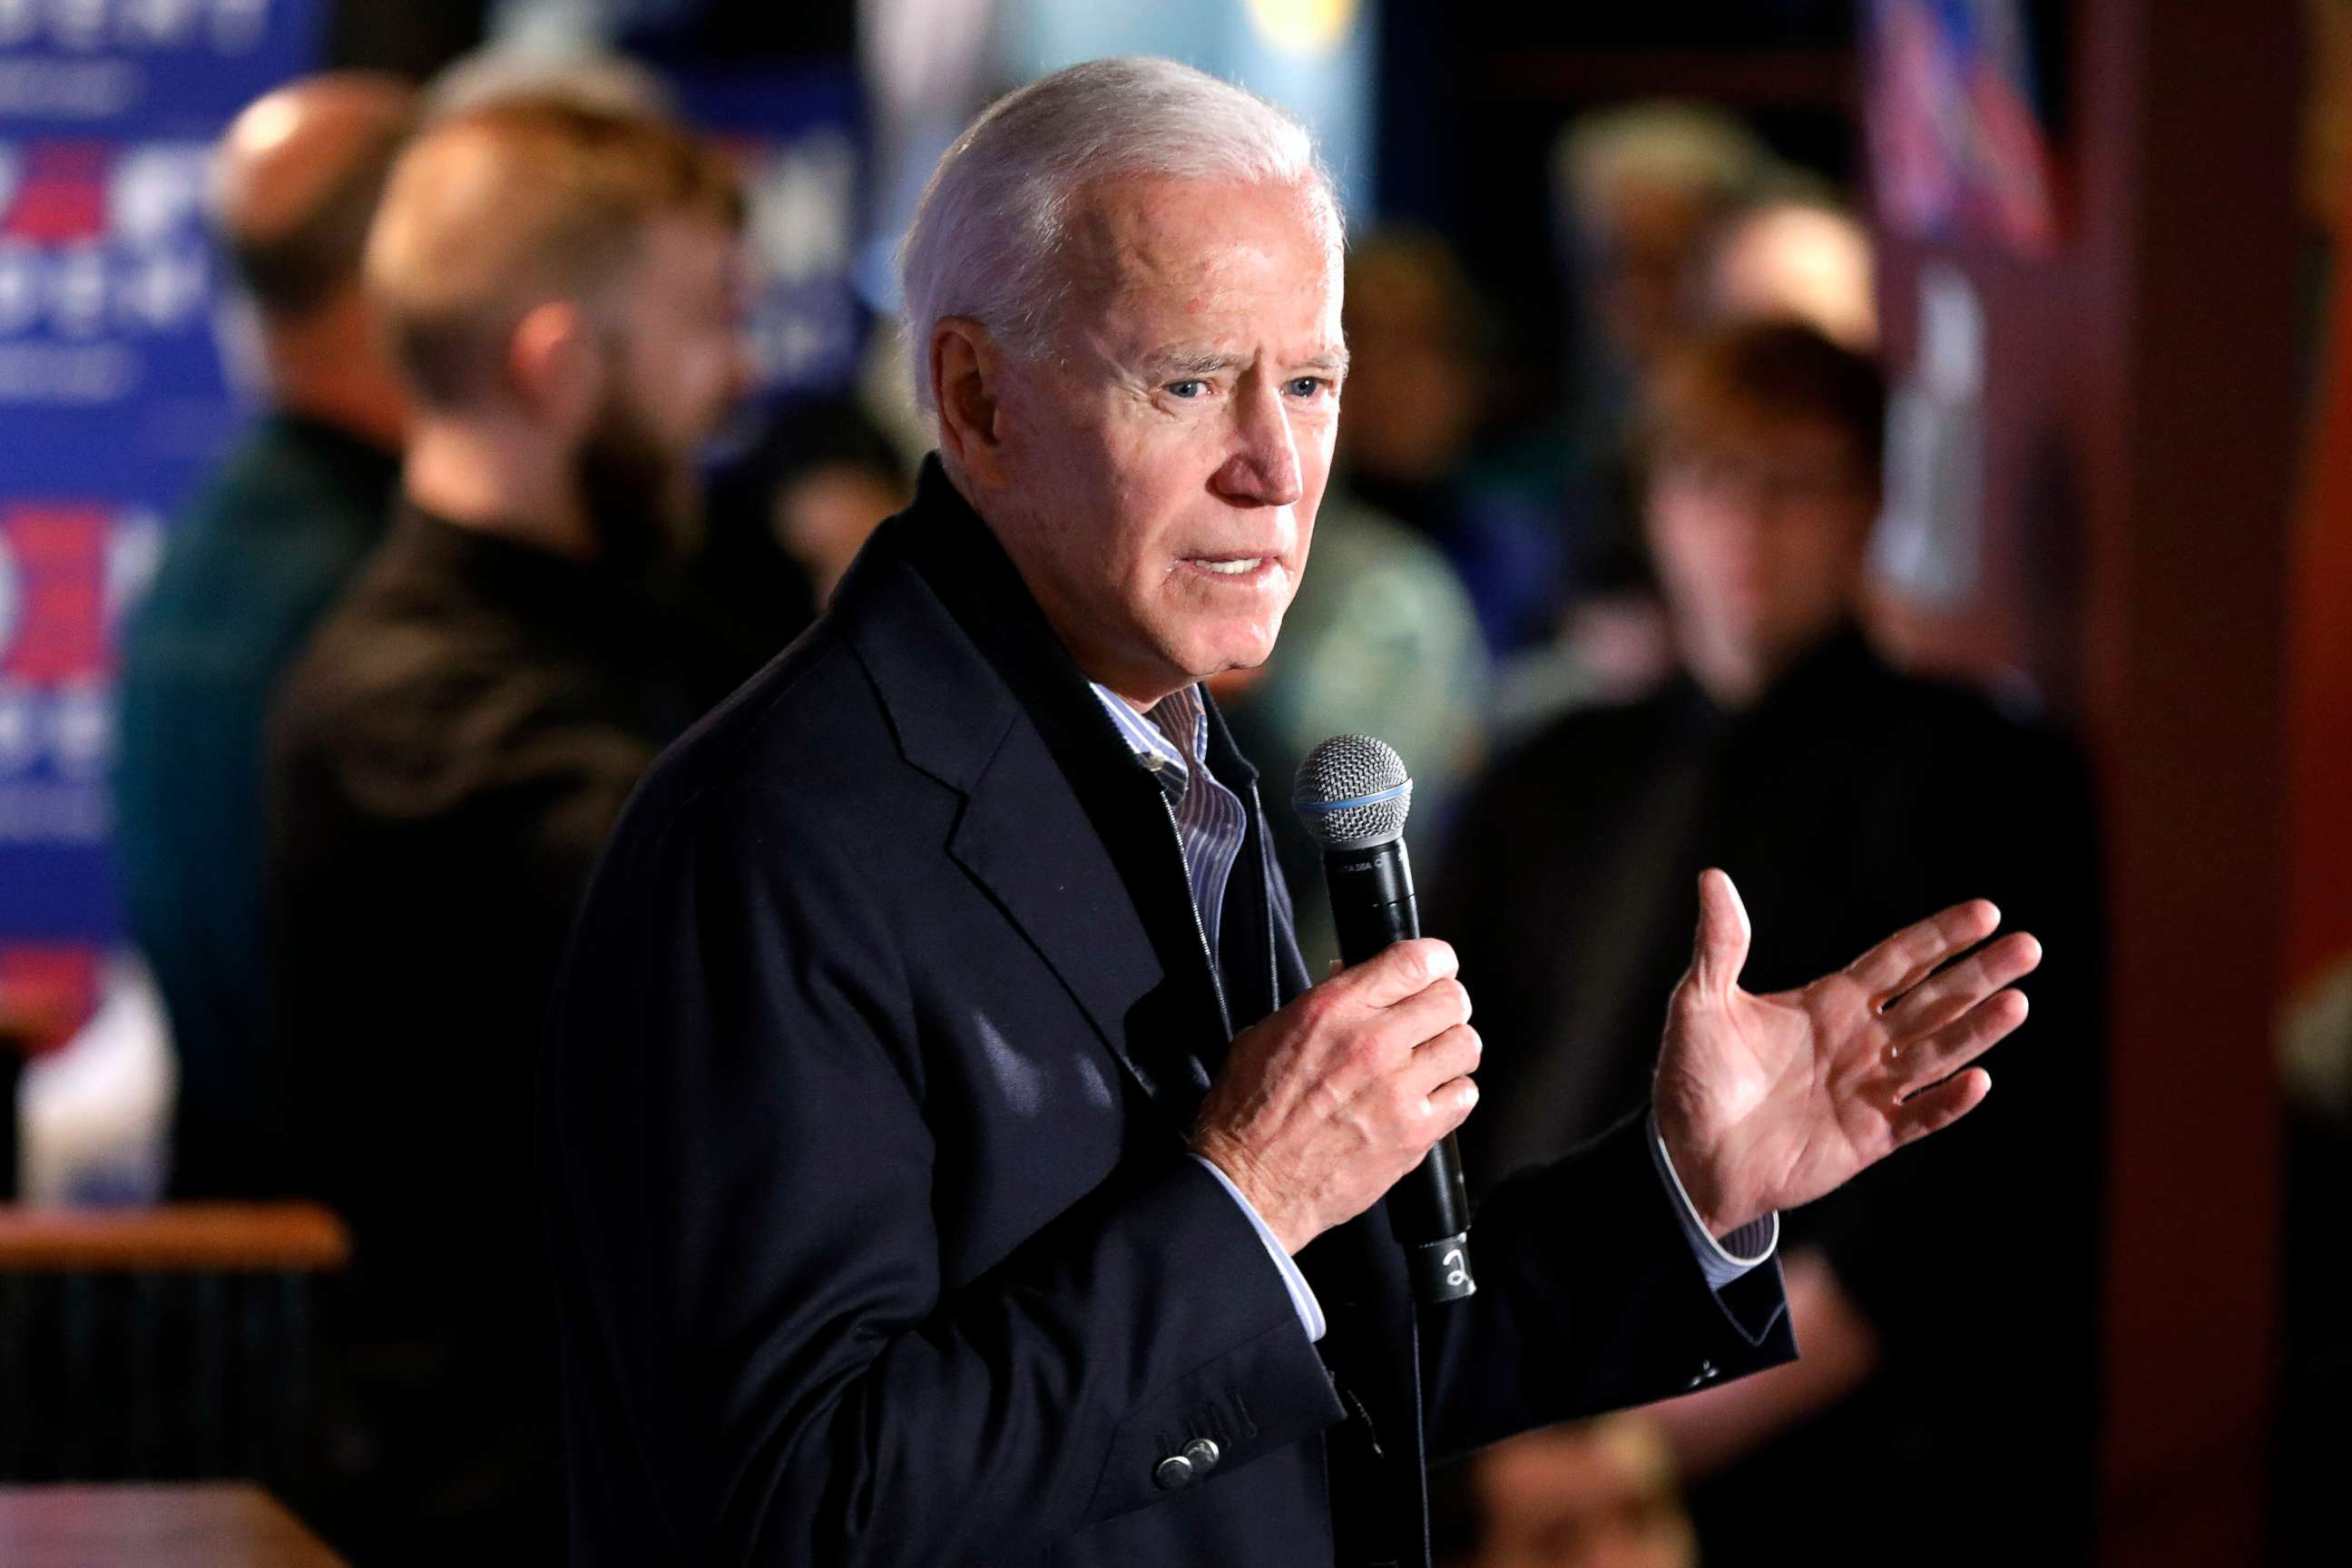 PHOTO: Former vice president and Democratic presidential candidate Joe Biden speaks during a campaign stop at the Community Oven restaurant in Hampton, N.H., May 13, 2019.